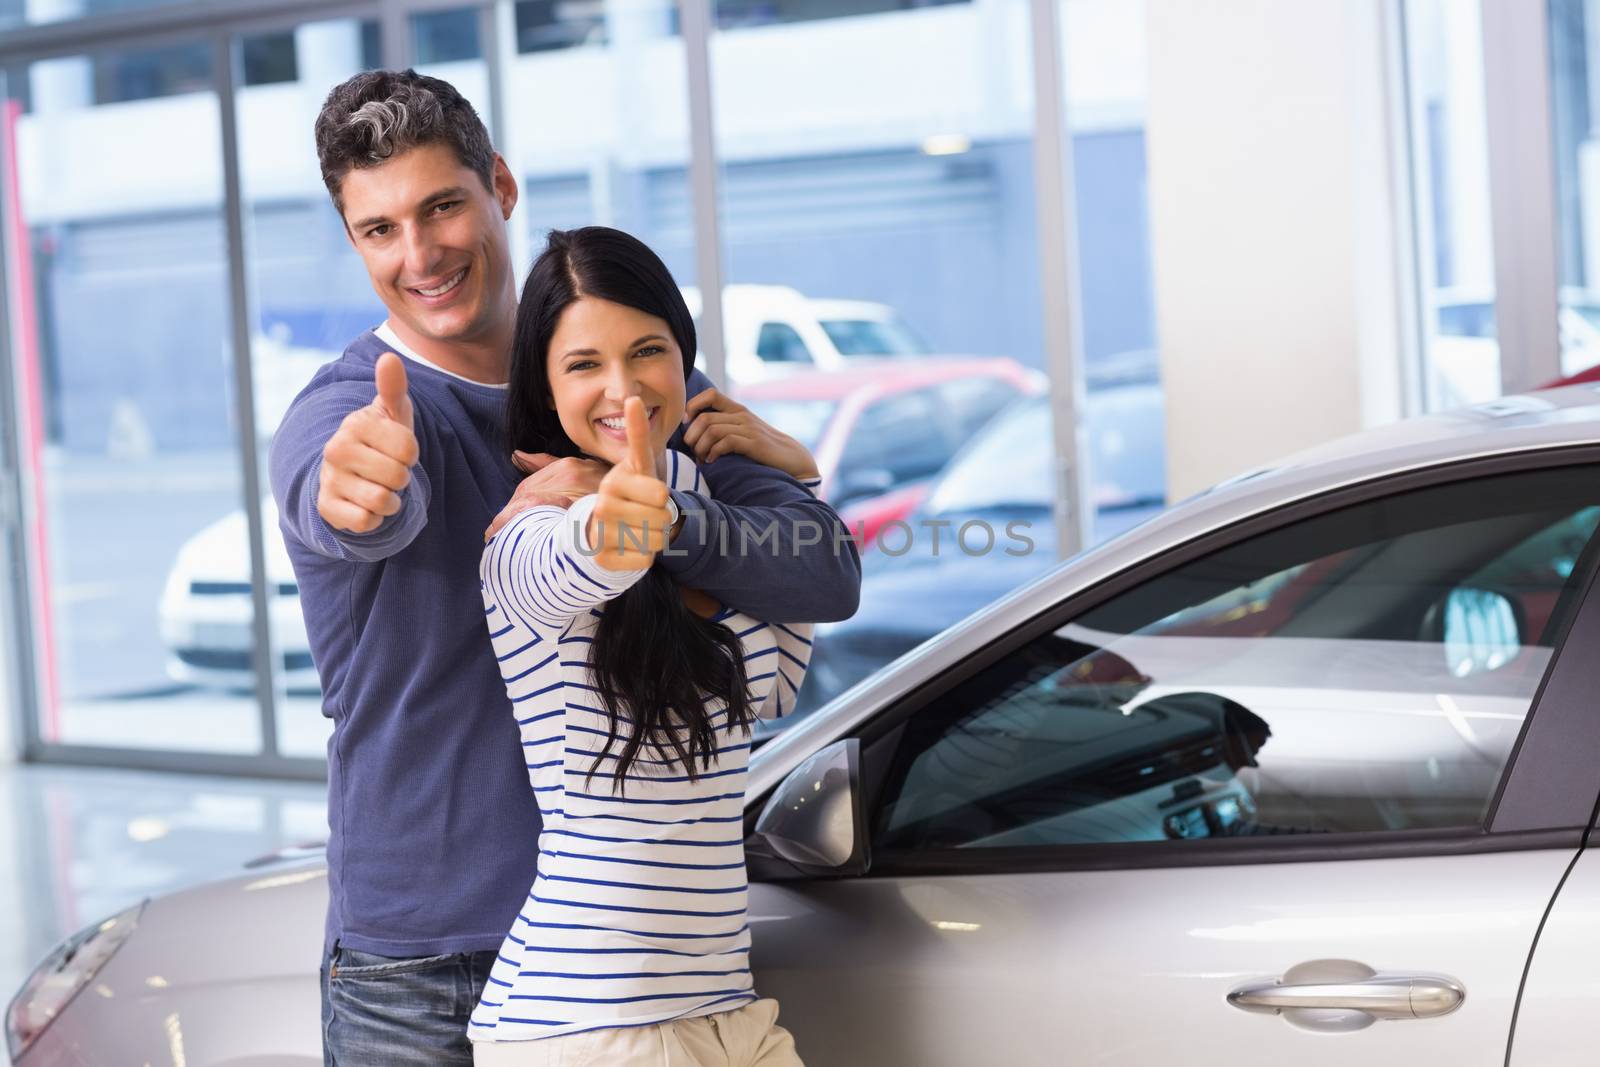 Smiling couple giving thumbs up by Wavebreakmedia